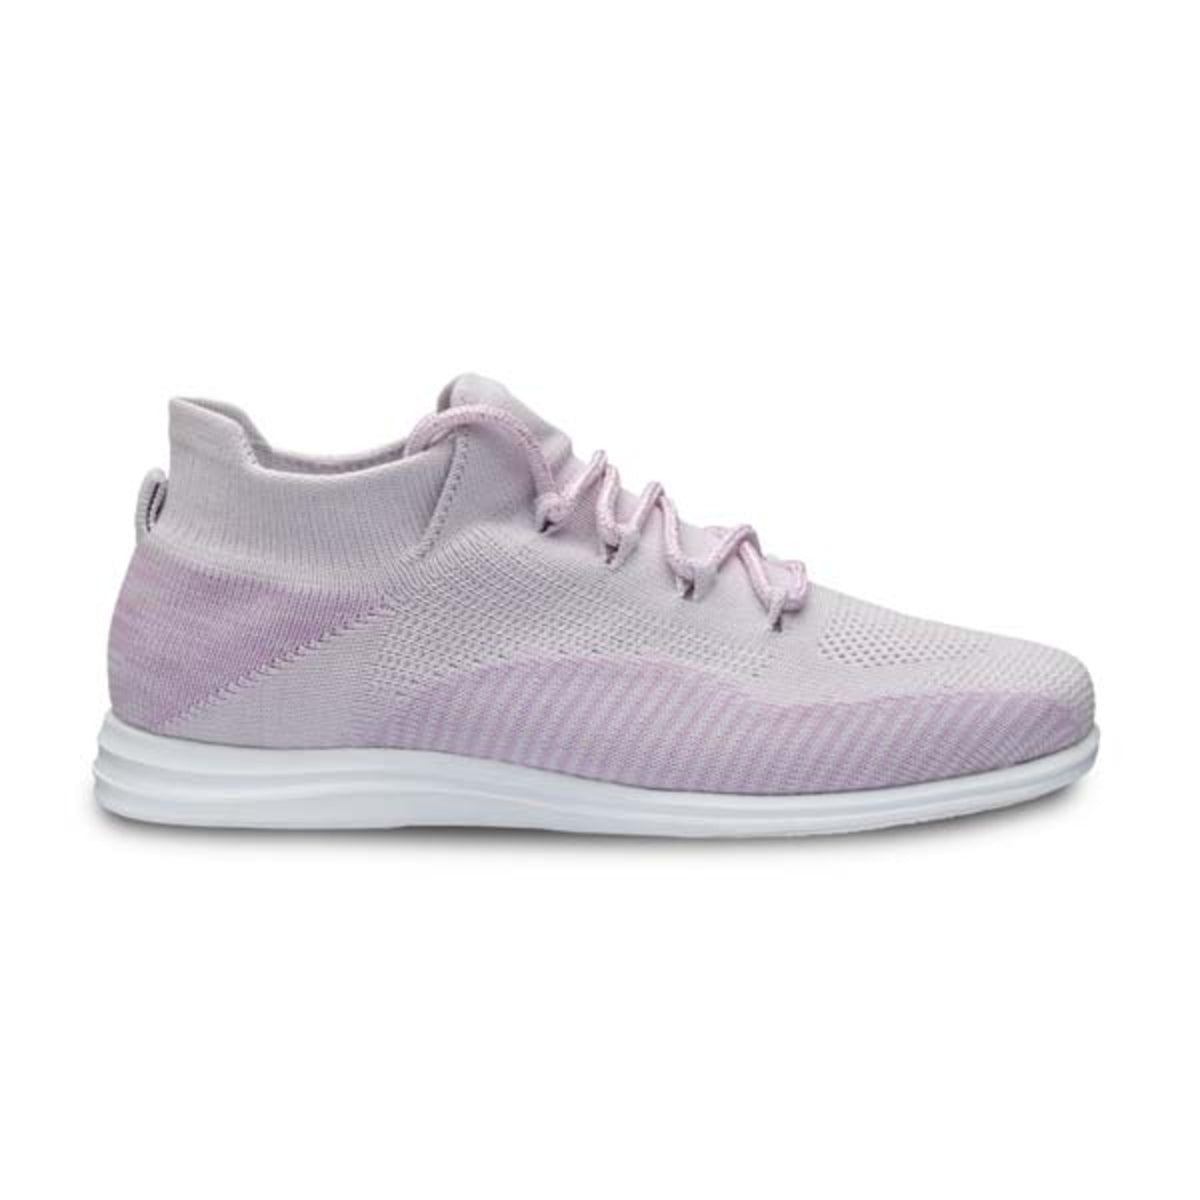 Twisted Knit Lilac Shoes